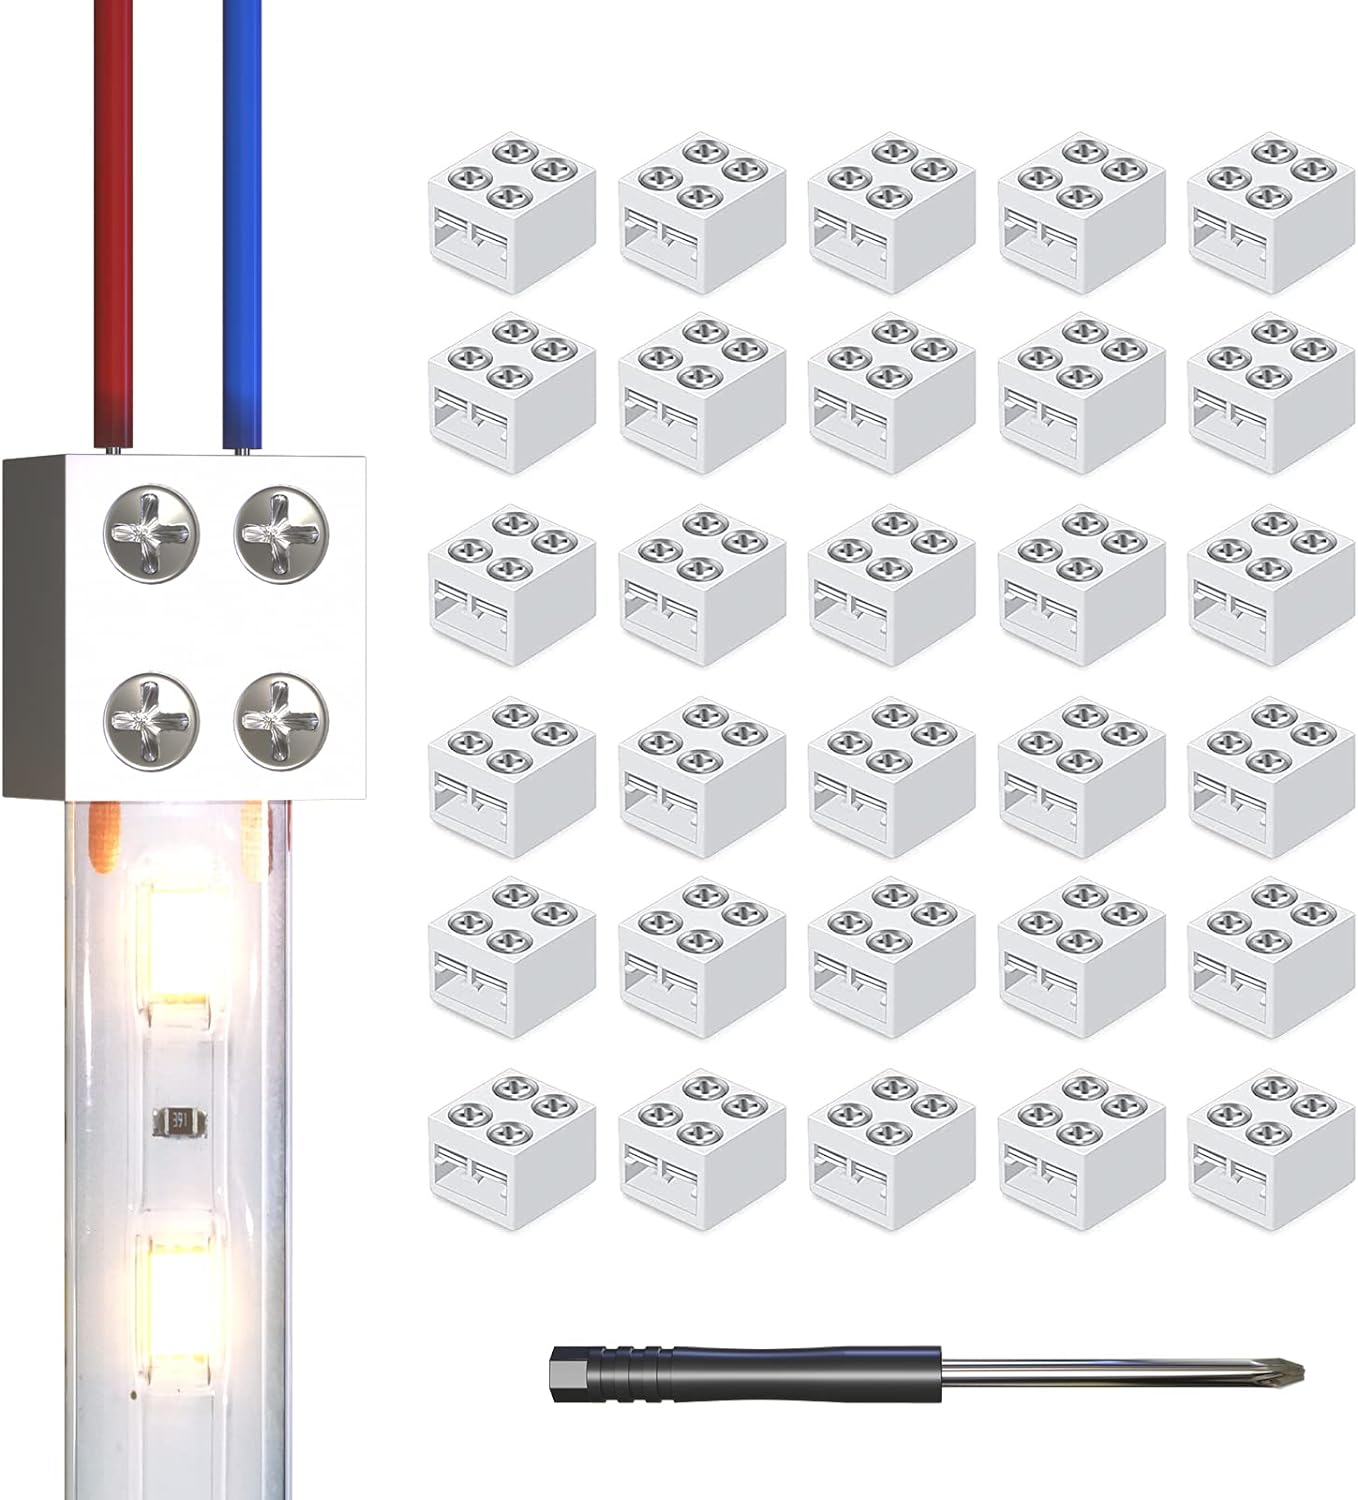 30 Pcs 8mm 2 Pin Solderless LED Light Strip Connectors - Lustaled 2 pin Screw Down Terminal Block Connector for 8MM Tape to Wire for 5V 12V 24V Single Color LED Strip Light,White, Screwdriver Included